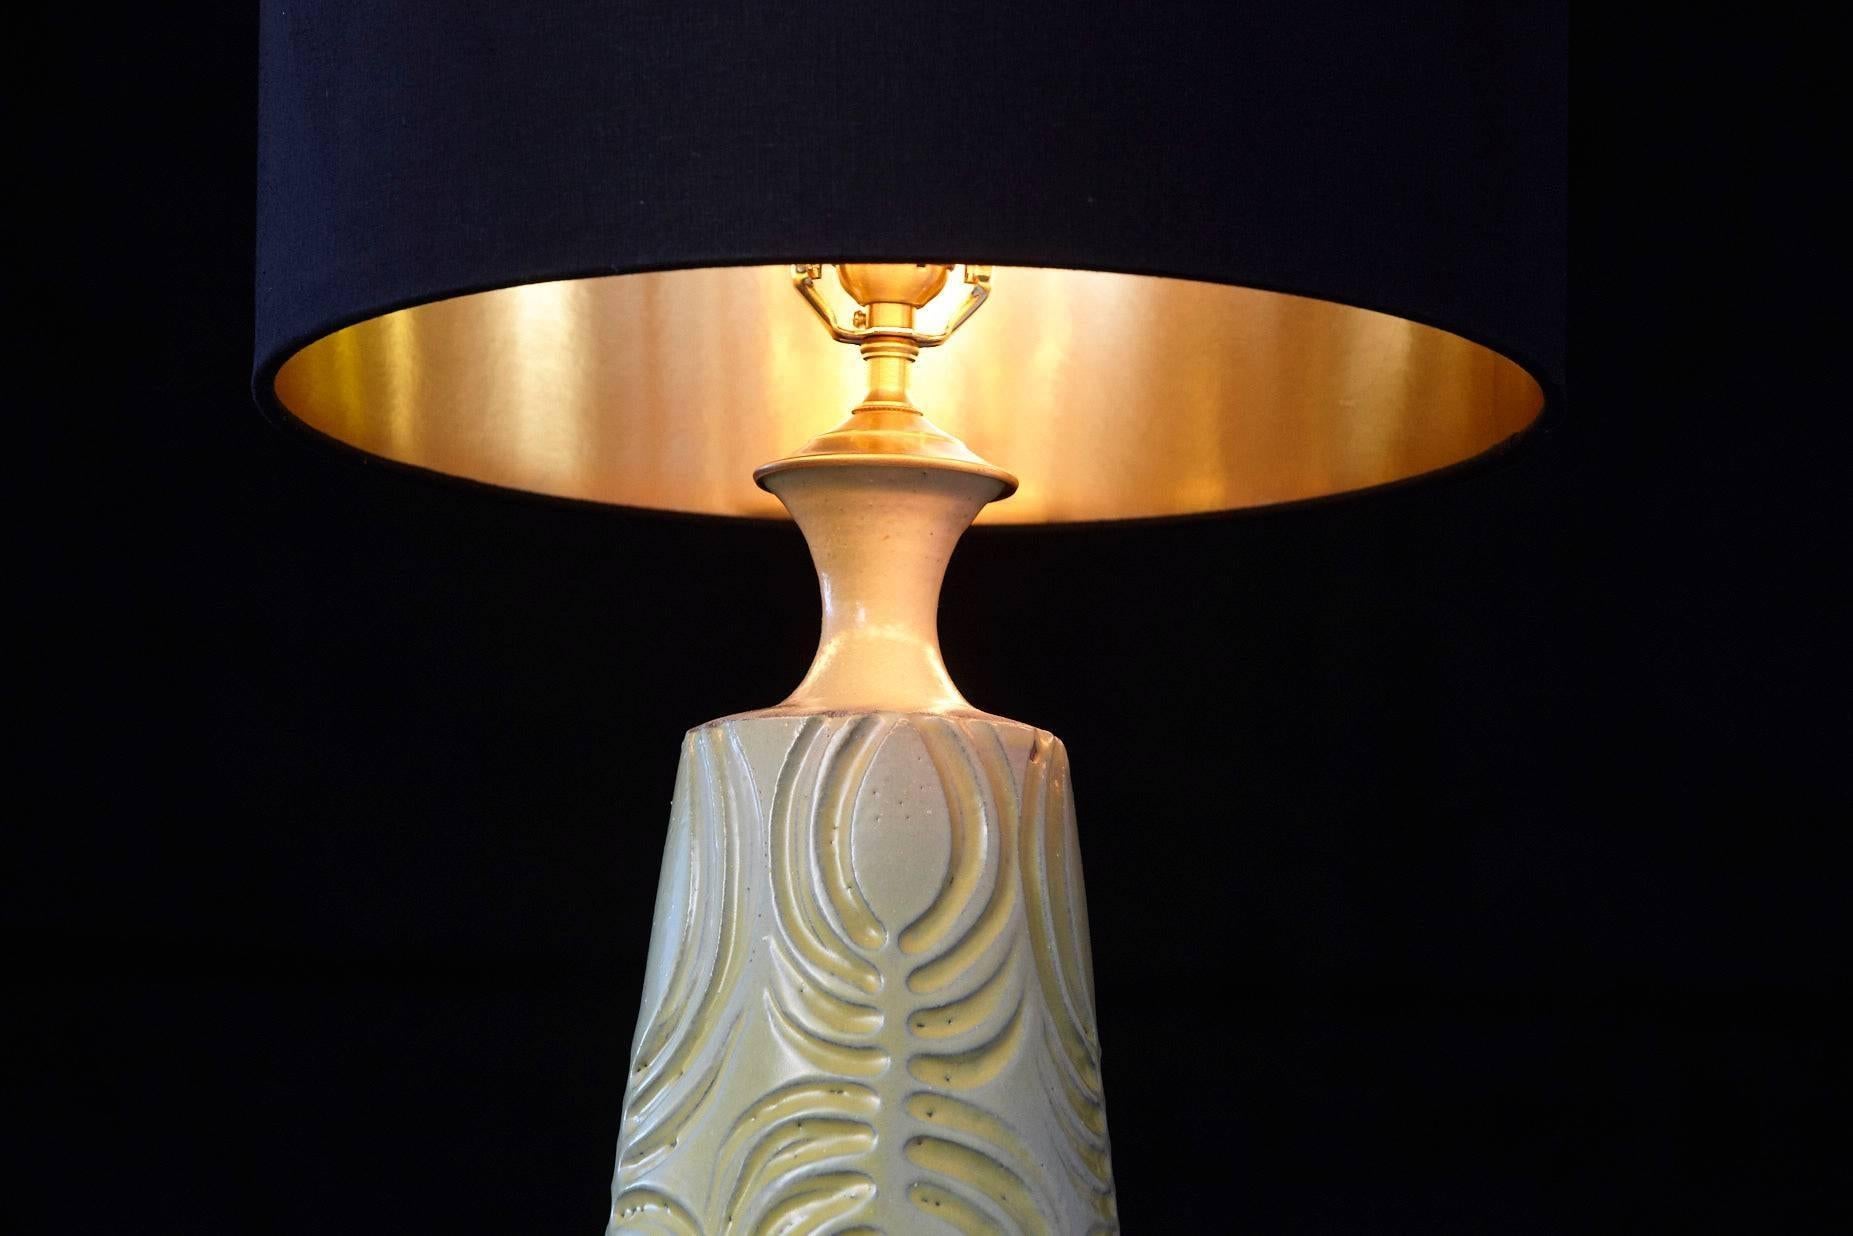 Glazed Yellow Ceramic Lamp with Decorative Elements by Robert Maxwell and New Shade For Sale